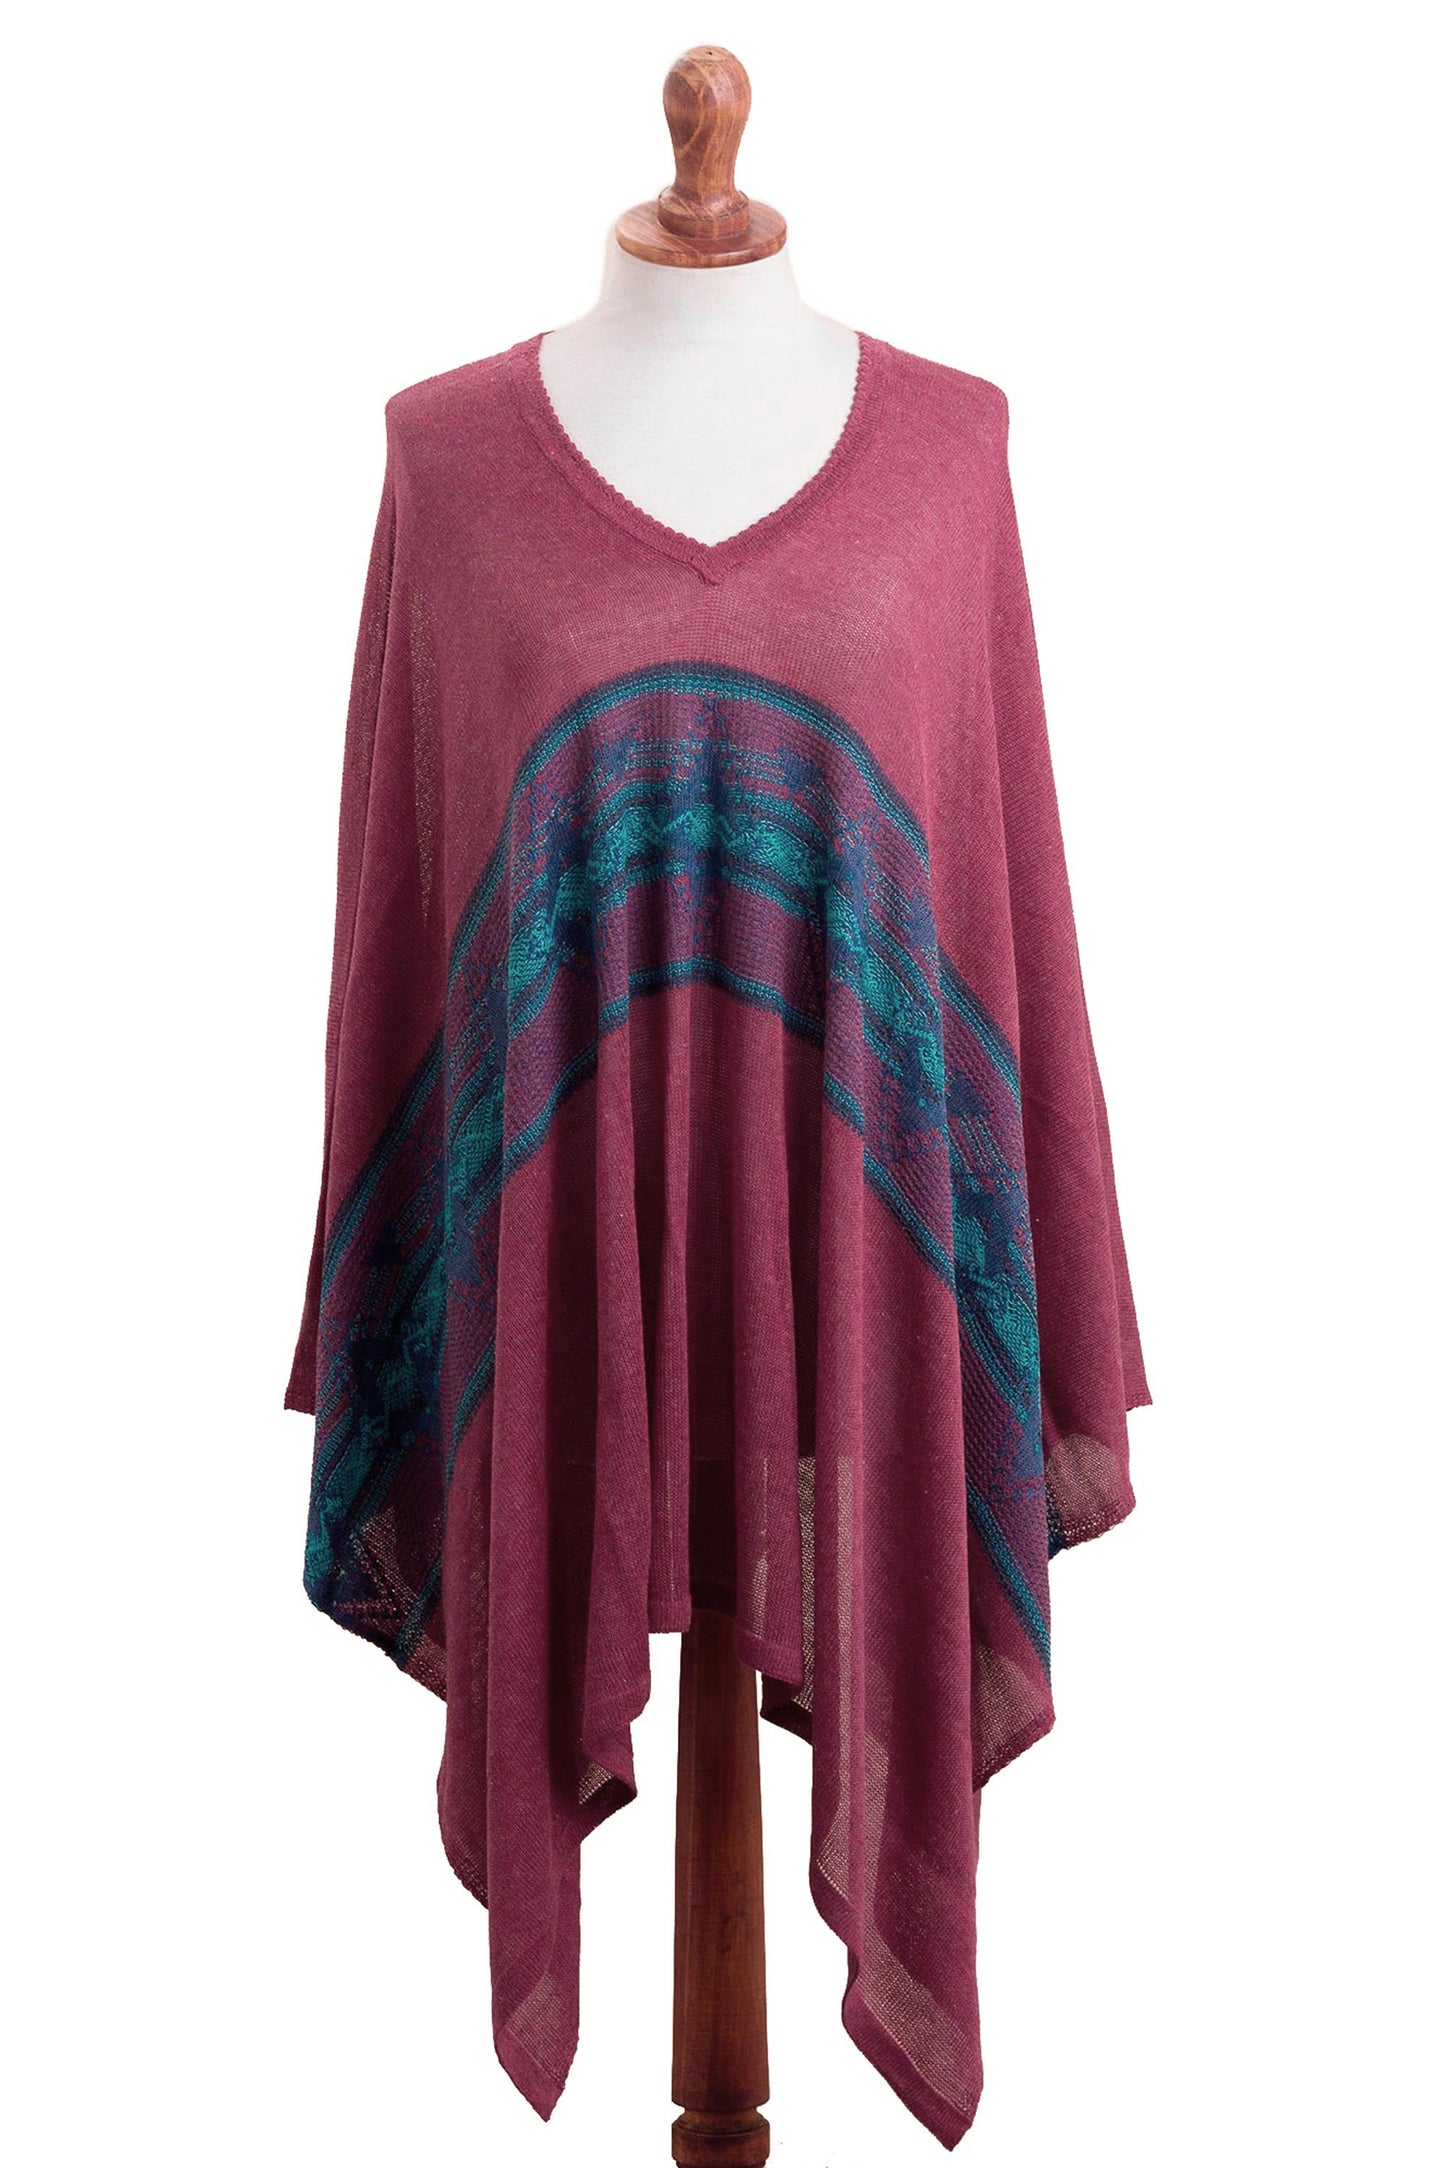 Andean Charm Cotton Blend Poncho in Cerise and Blue from Peru